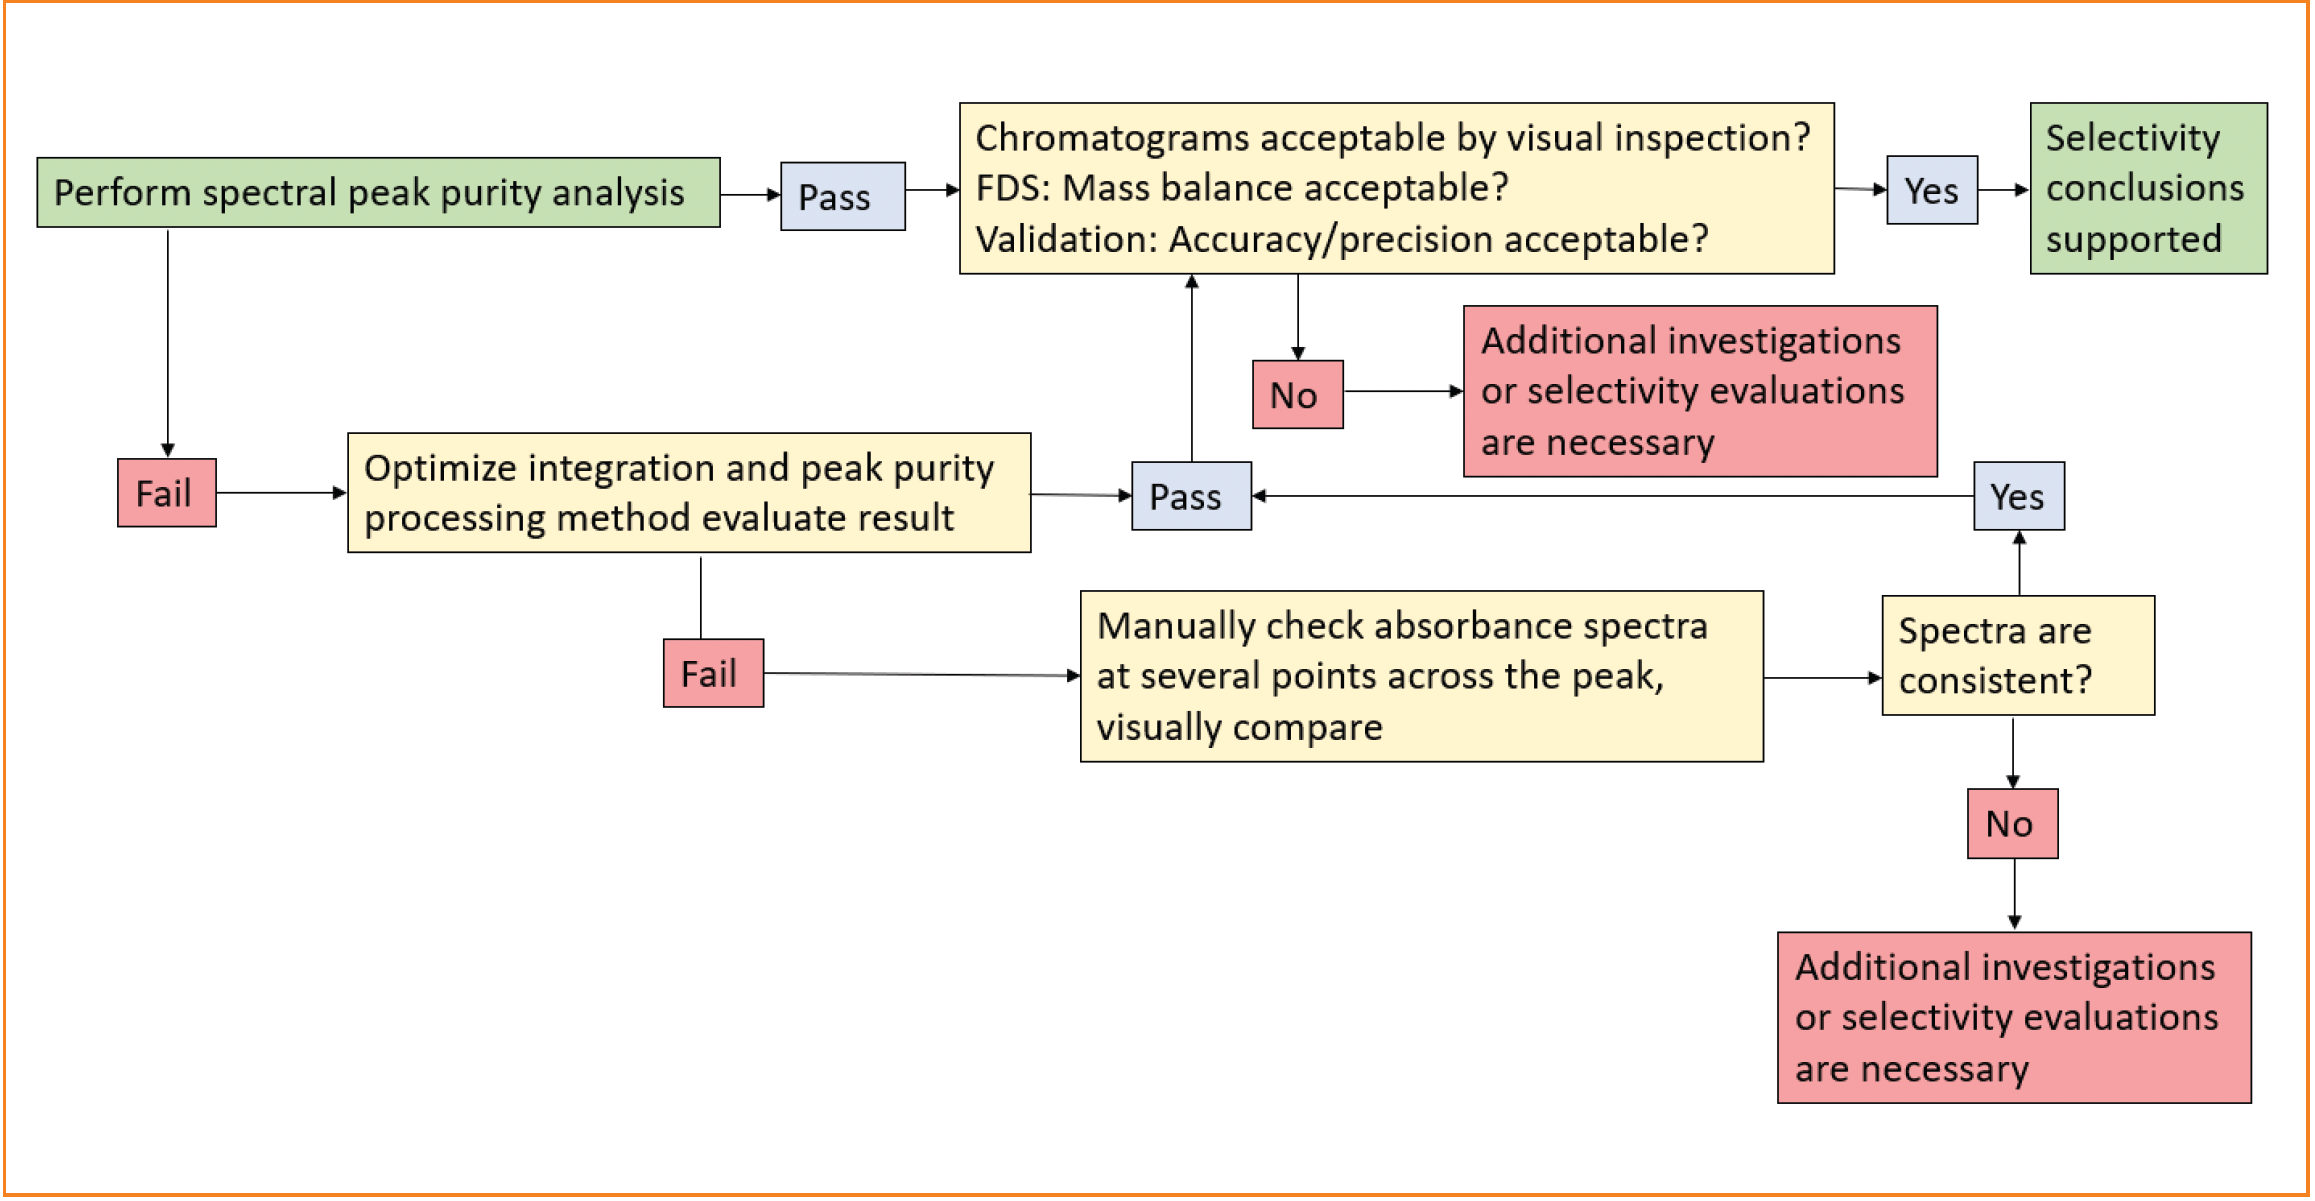 FIGURE 4: PDA (UV) PPA suggested decision tree for determining whether additional investigation by other techniques is necessary for establishing peak purity.